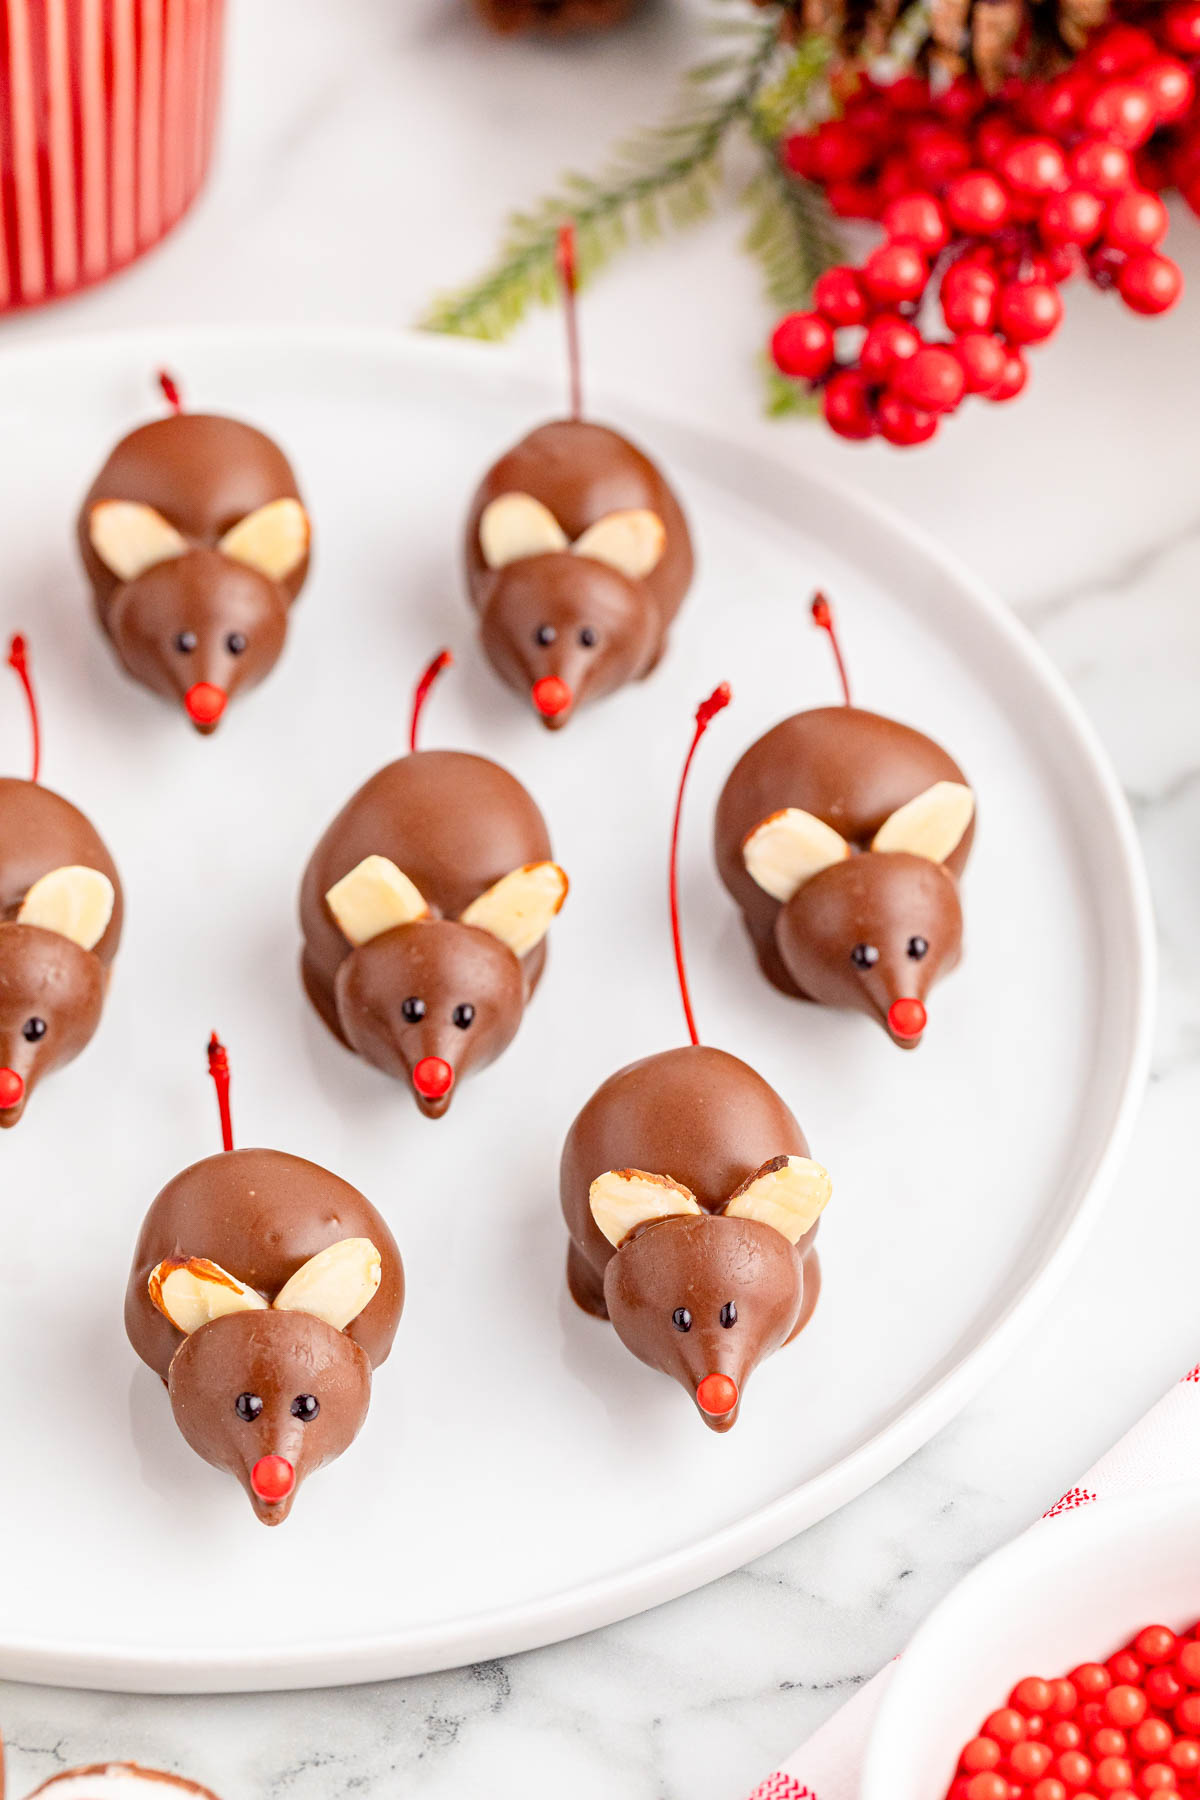 Chocolate mice on a plate with red and white decorations.